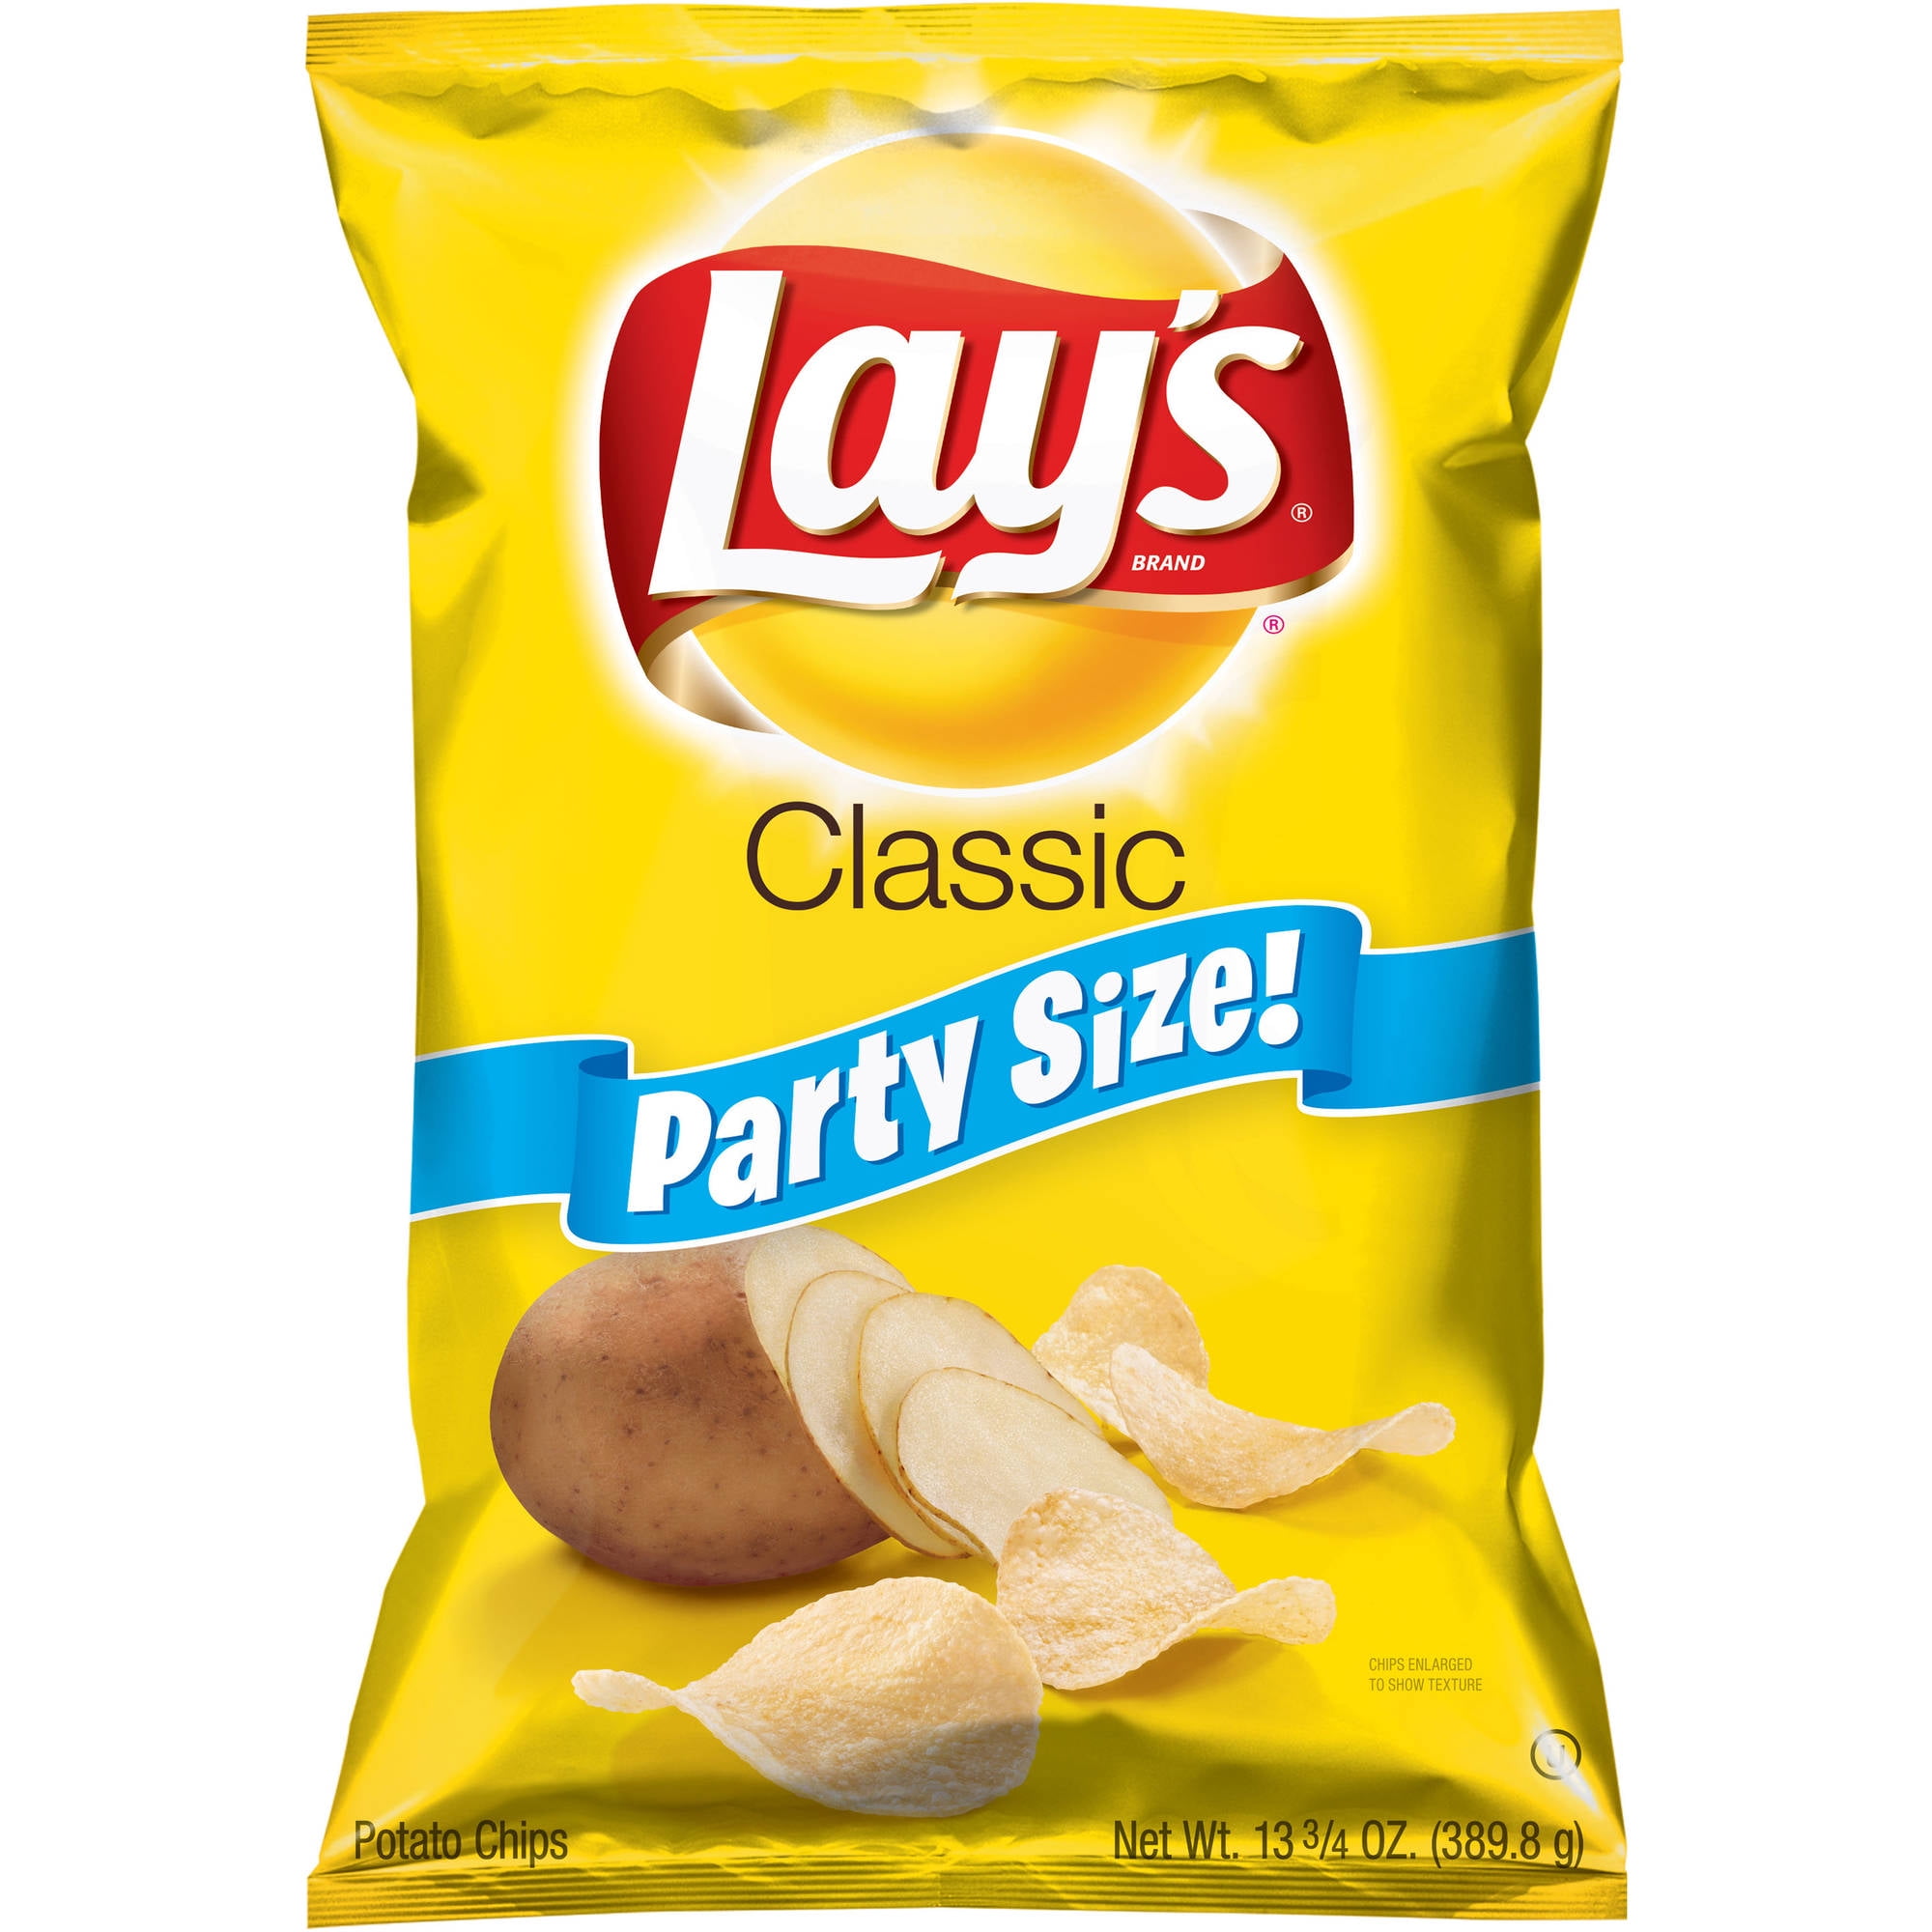 Lays Classic Party Size